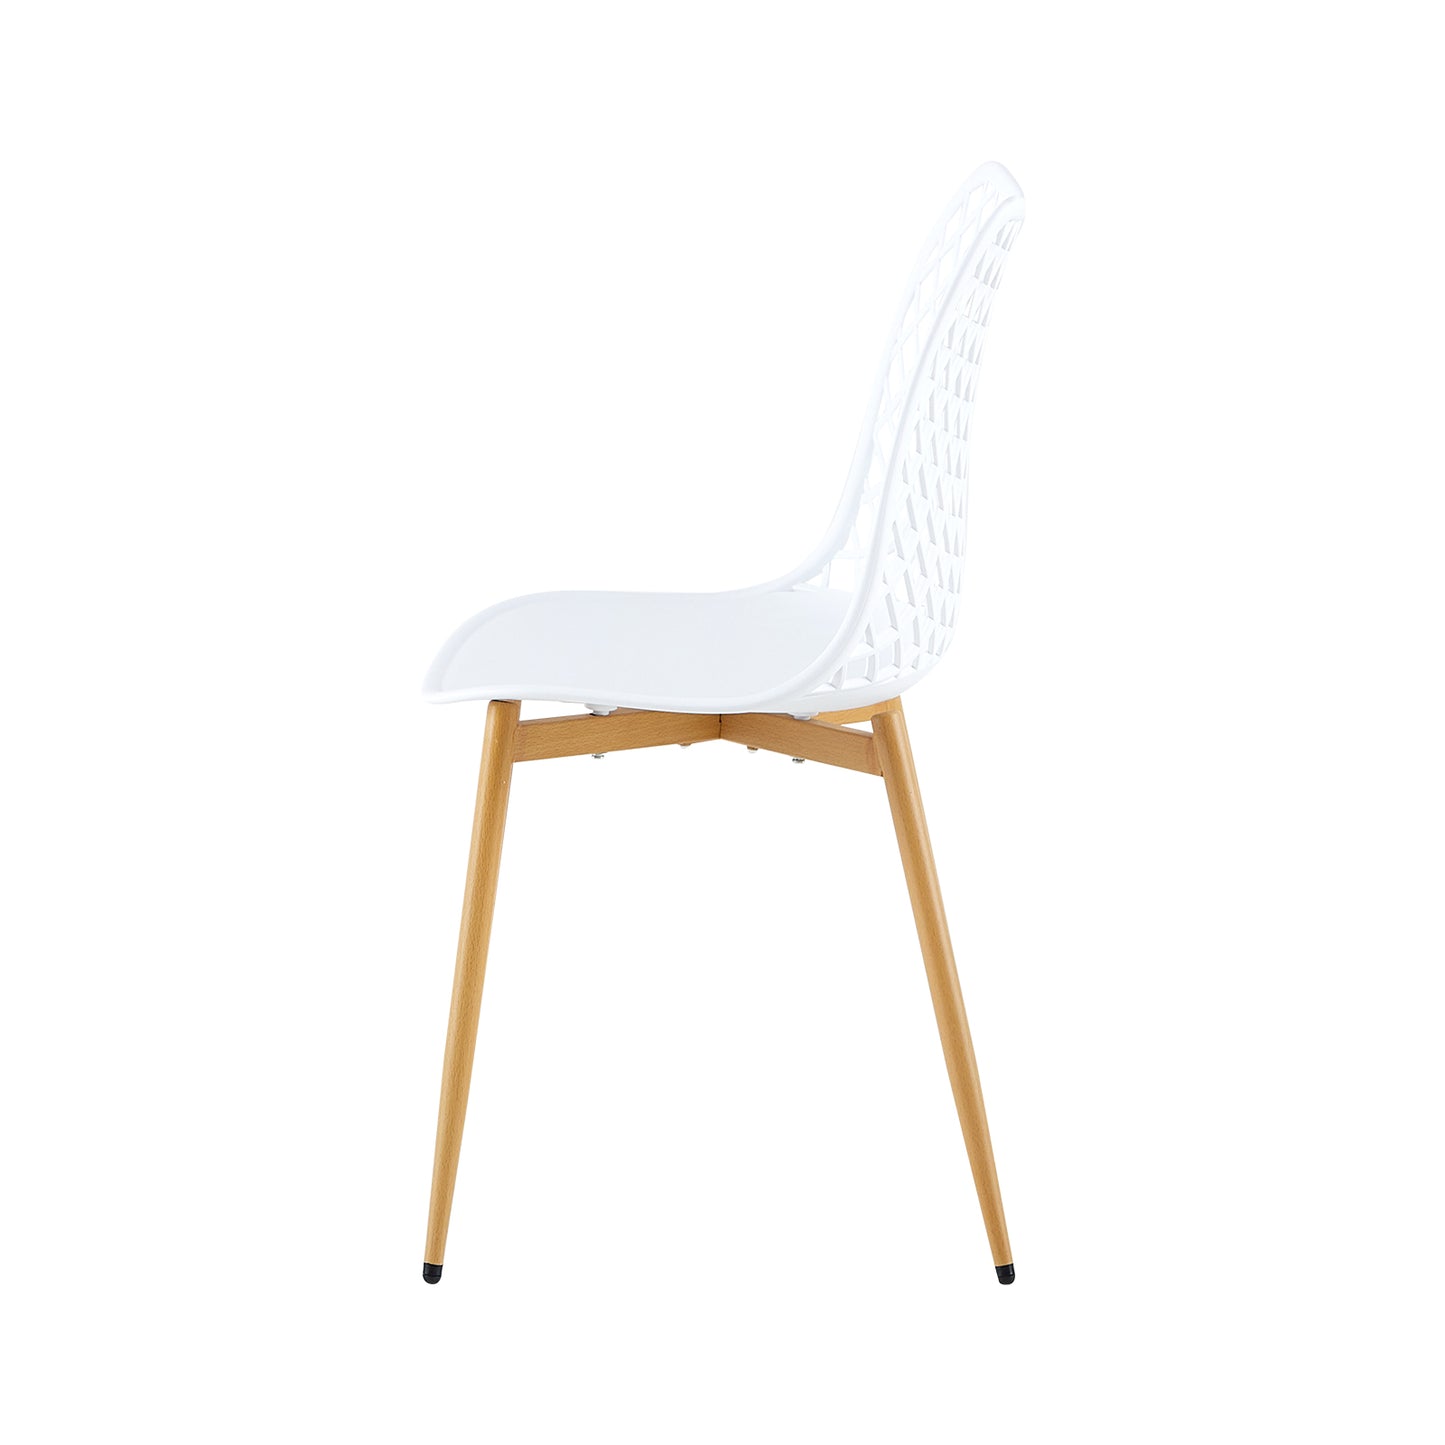 COVADA Hollow Chair with Iron Legs - White